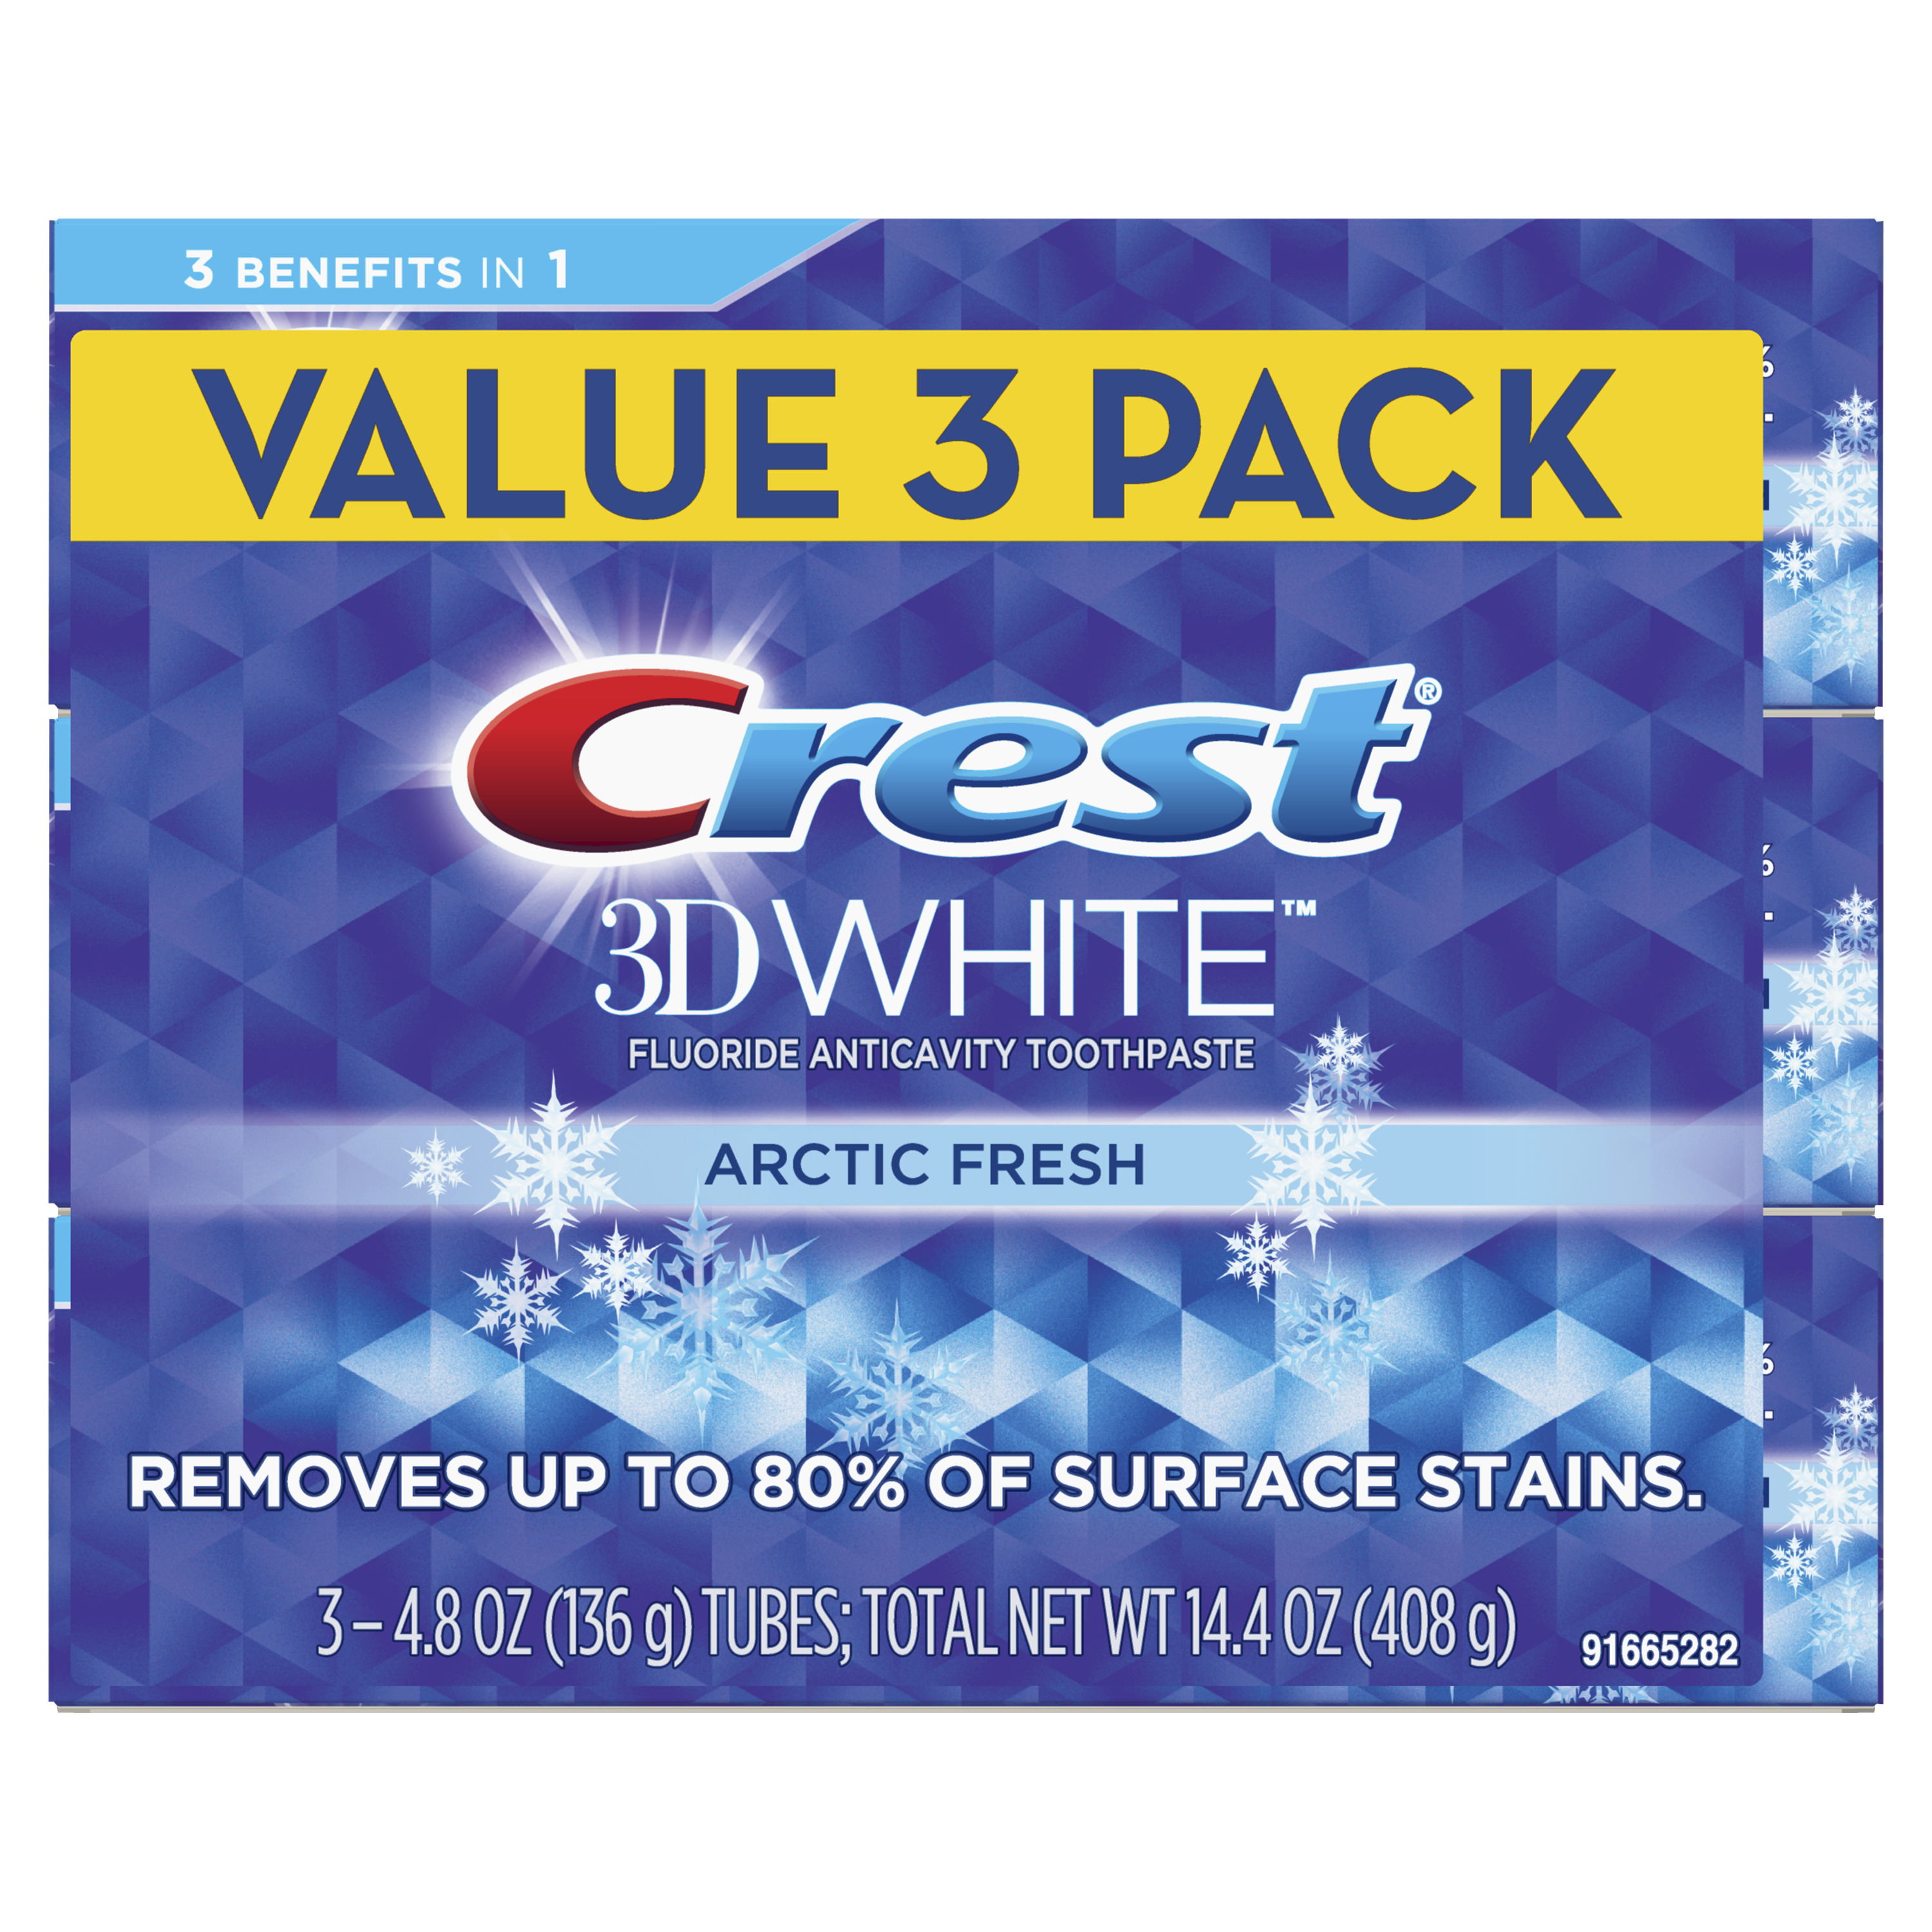 Crest 3D White Whitening Toothpaste, Arctic Fresh, Icy Cool Mint Flavor, 4.8 oz, Pack of 3 - image 1 of 8